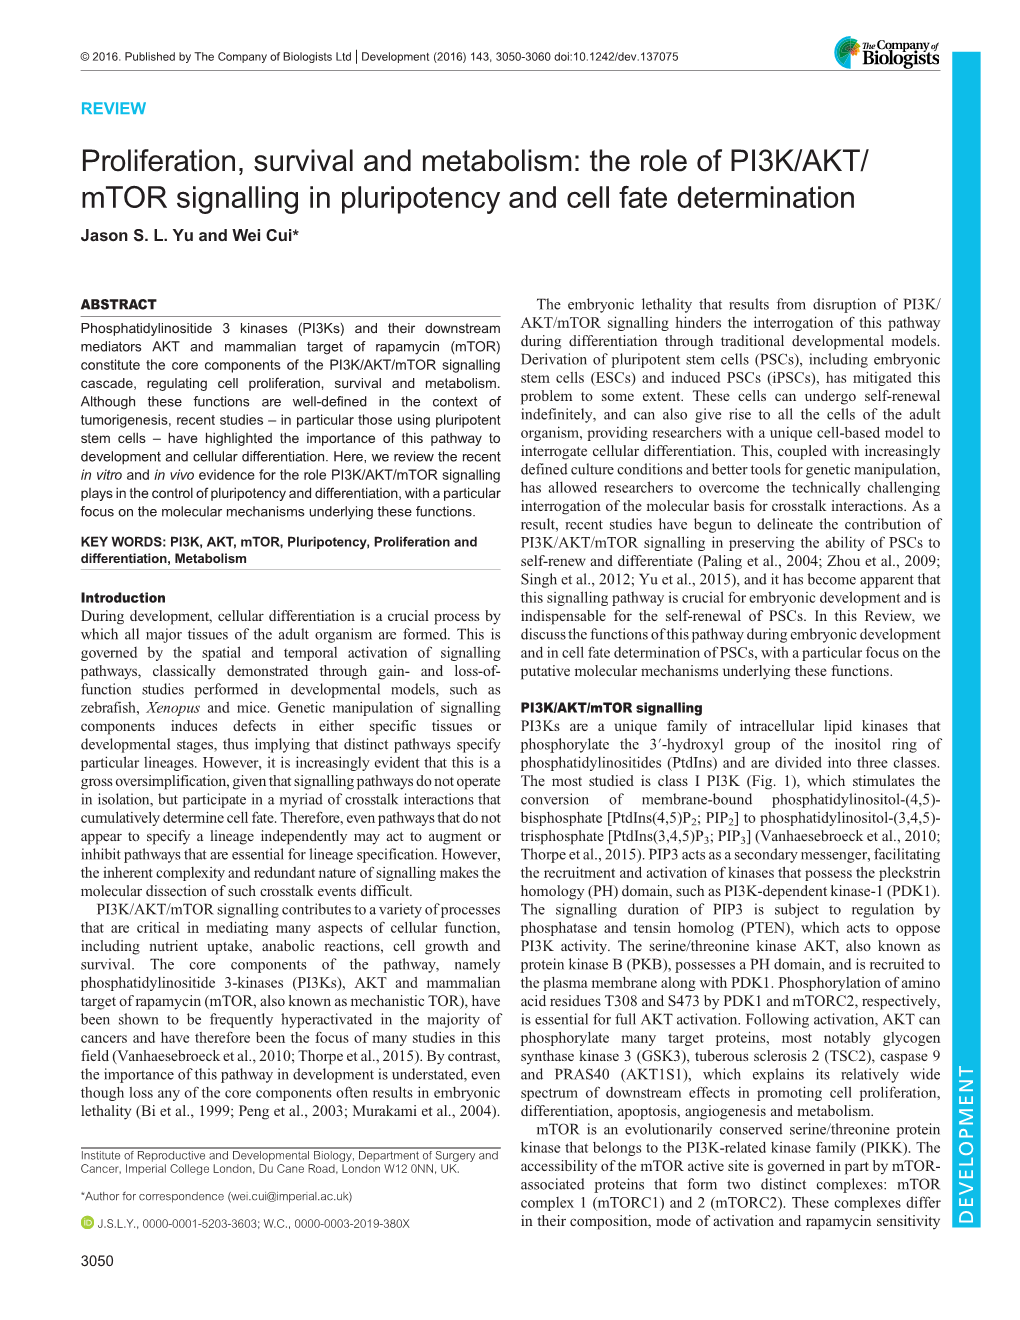 The Role of PI3K/AKT/Mtor Signalling in Pluripotency and Cell Fate